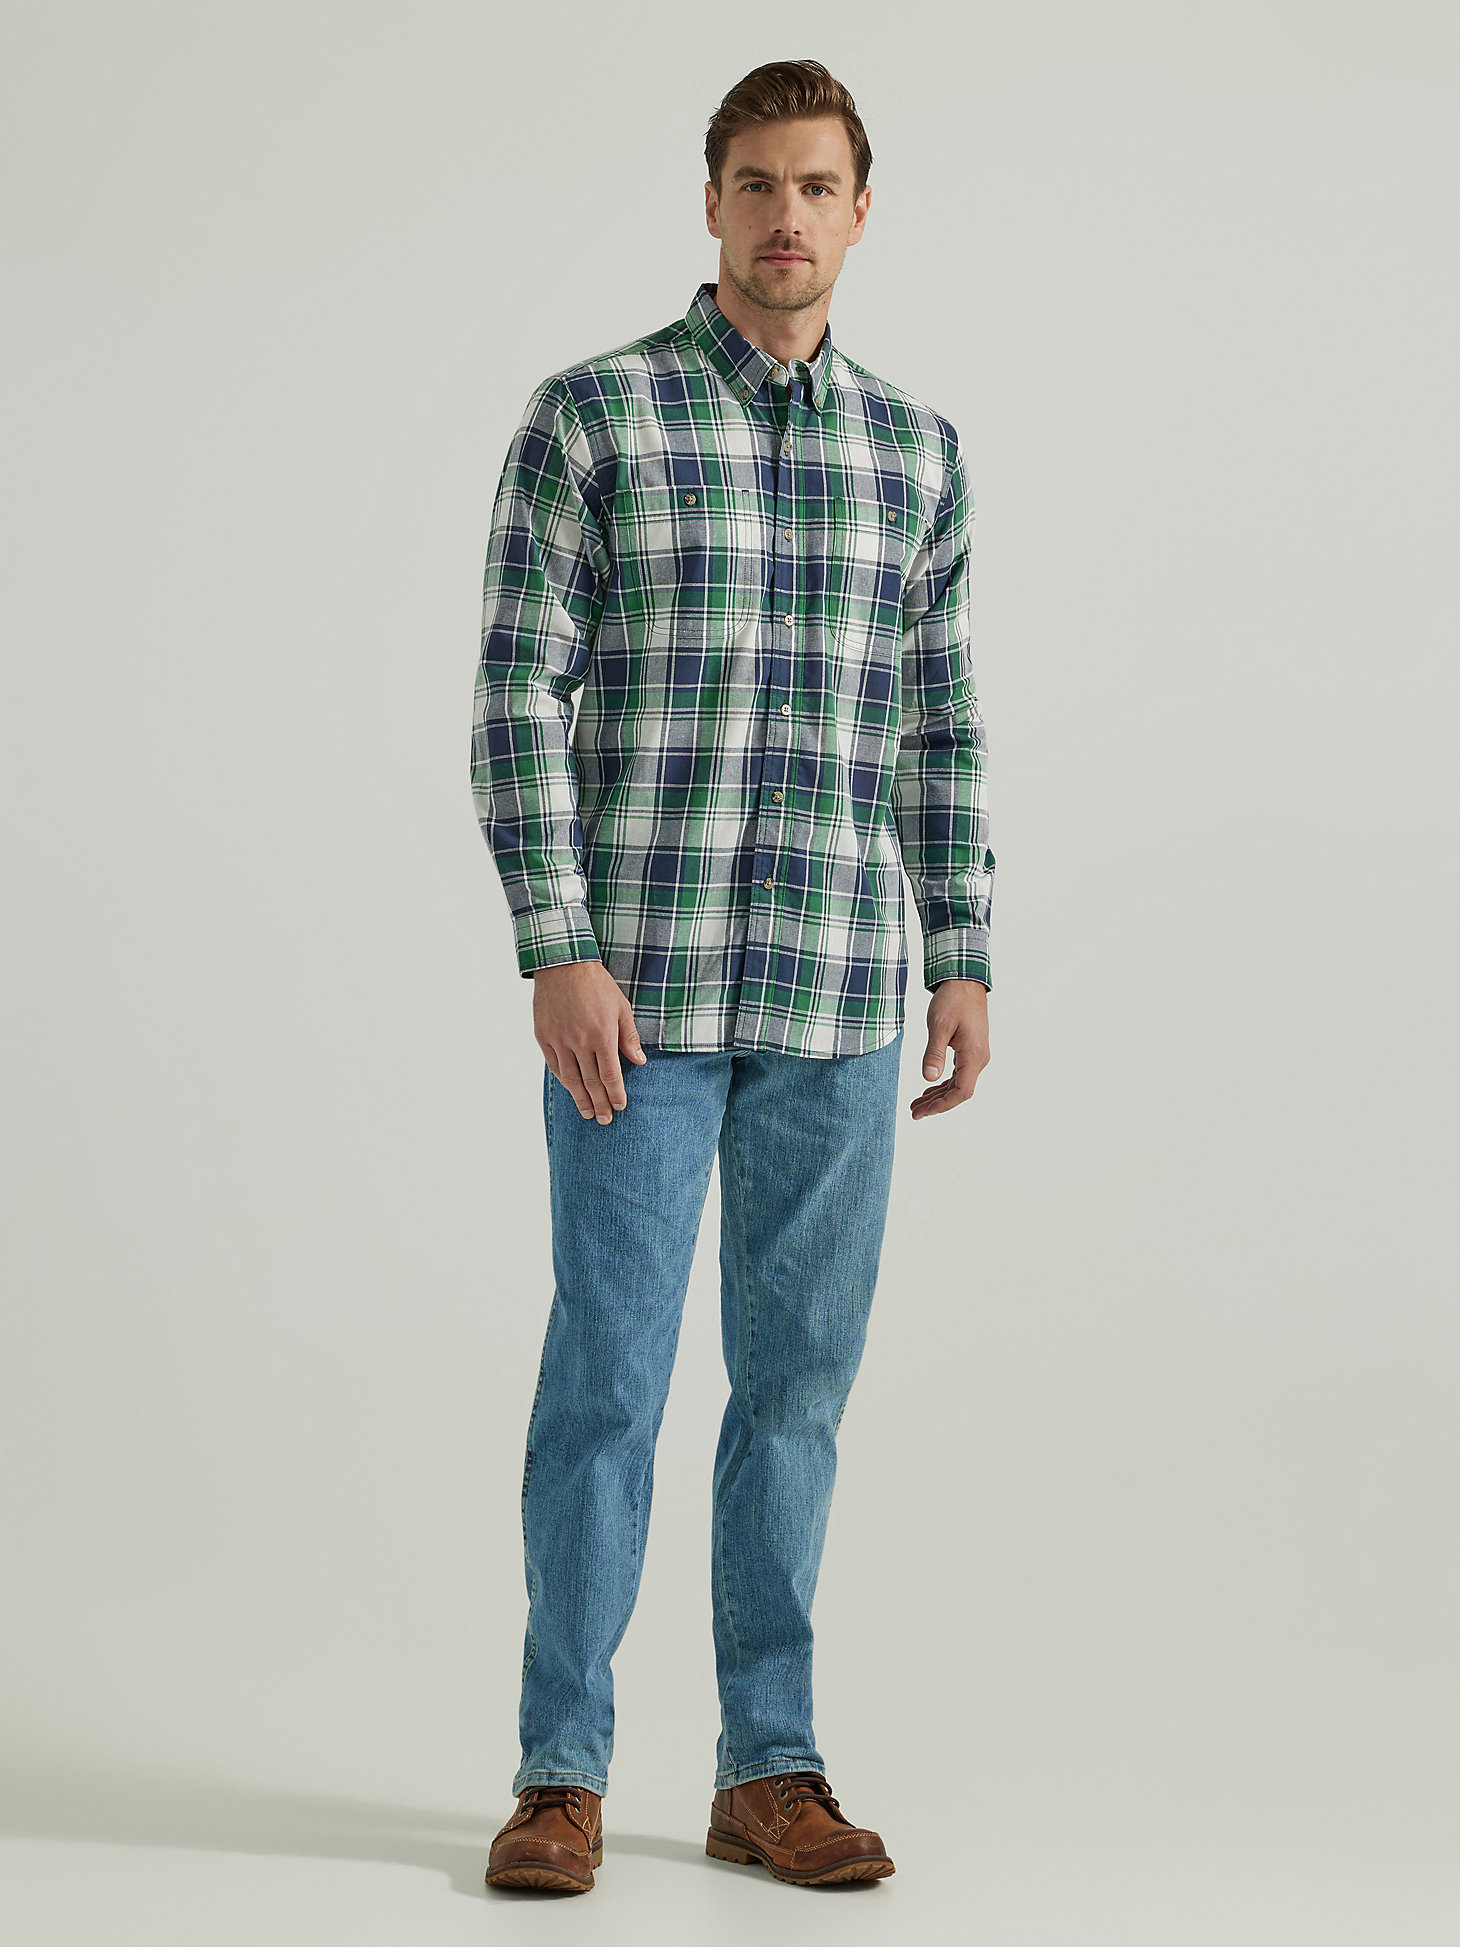 Wrangler Rugged Wear® Long Sleeve Easy Care Plaid Button-Down Shirt in Green Navy alternative view 1